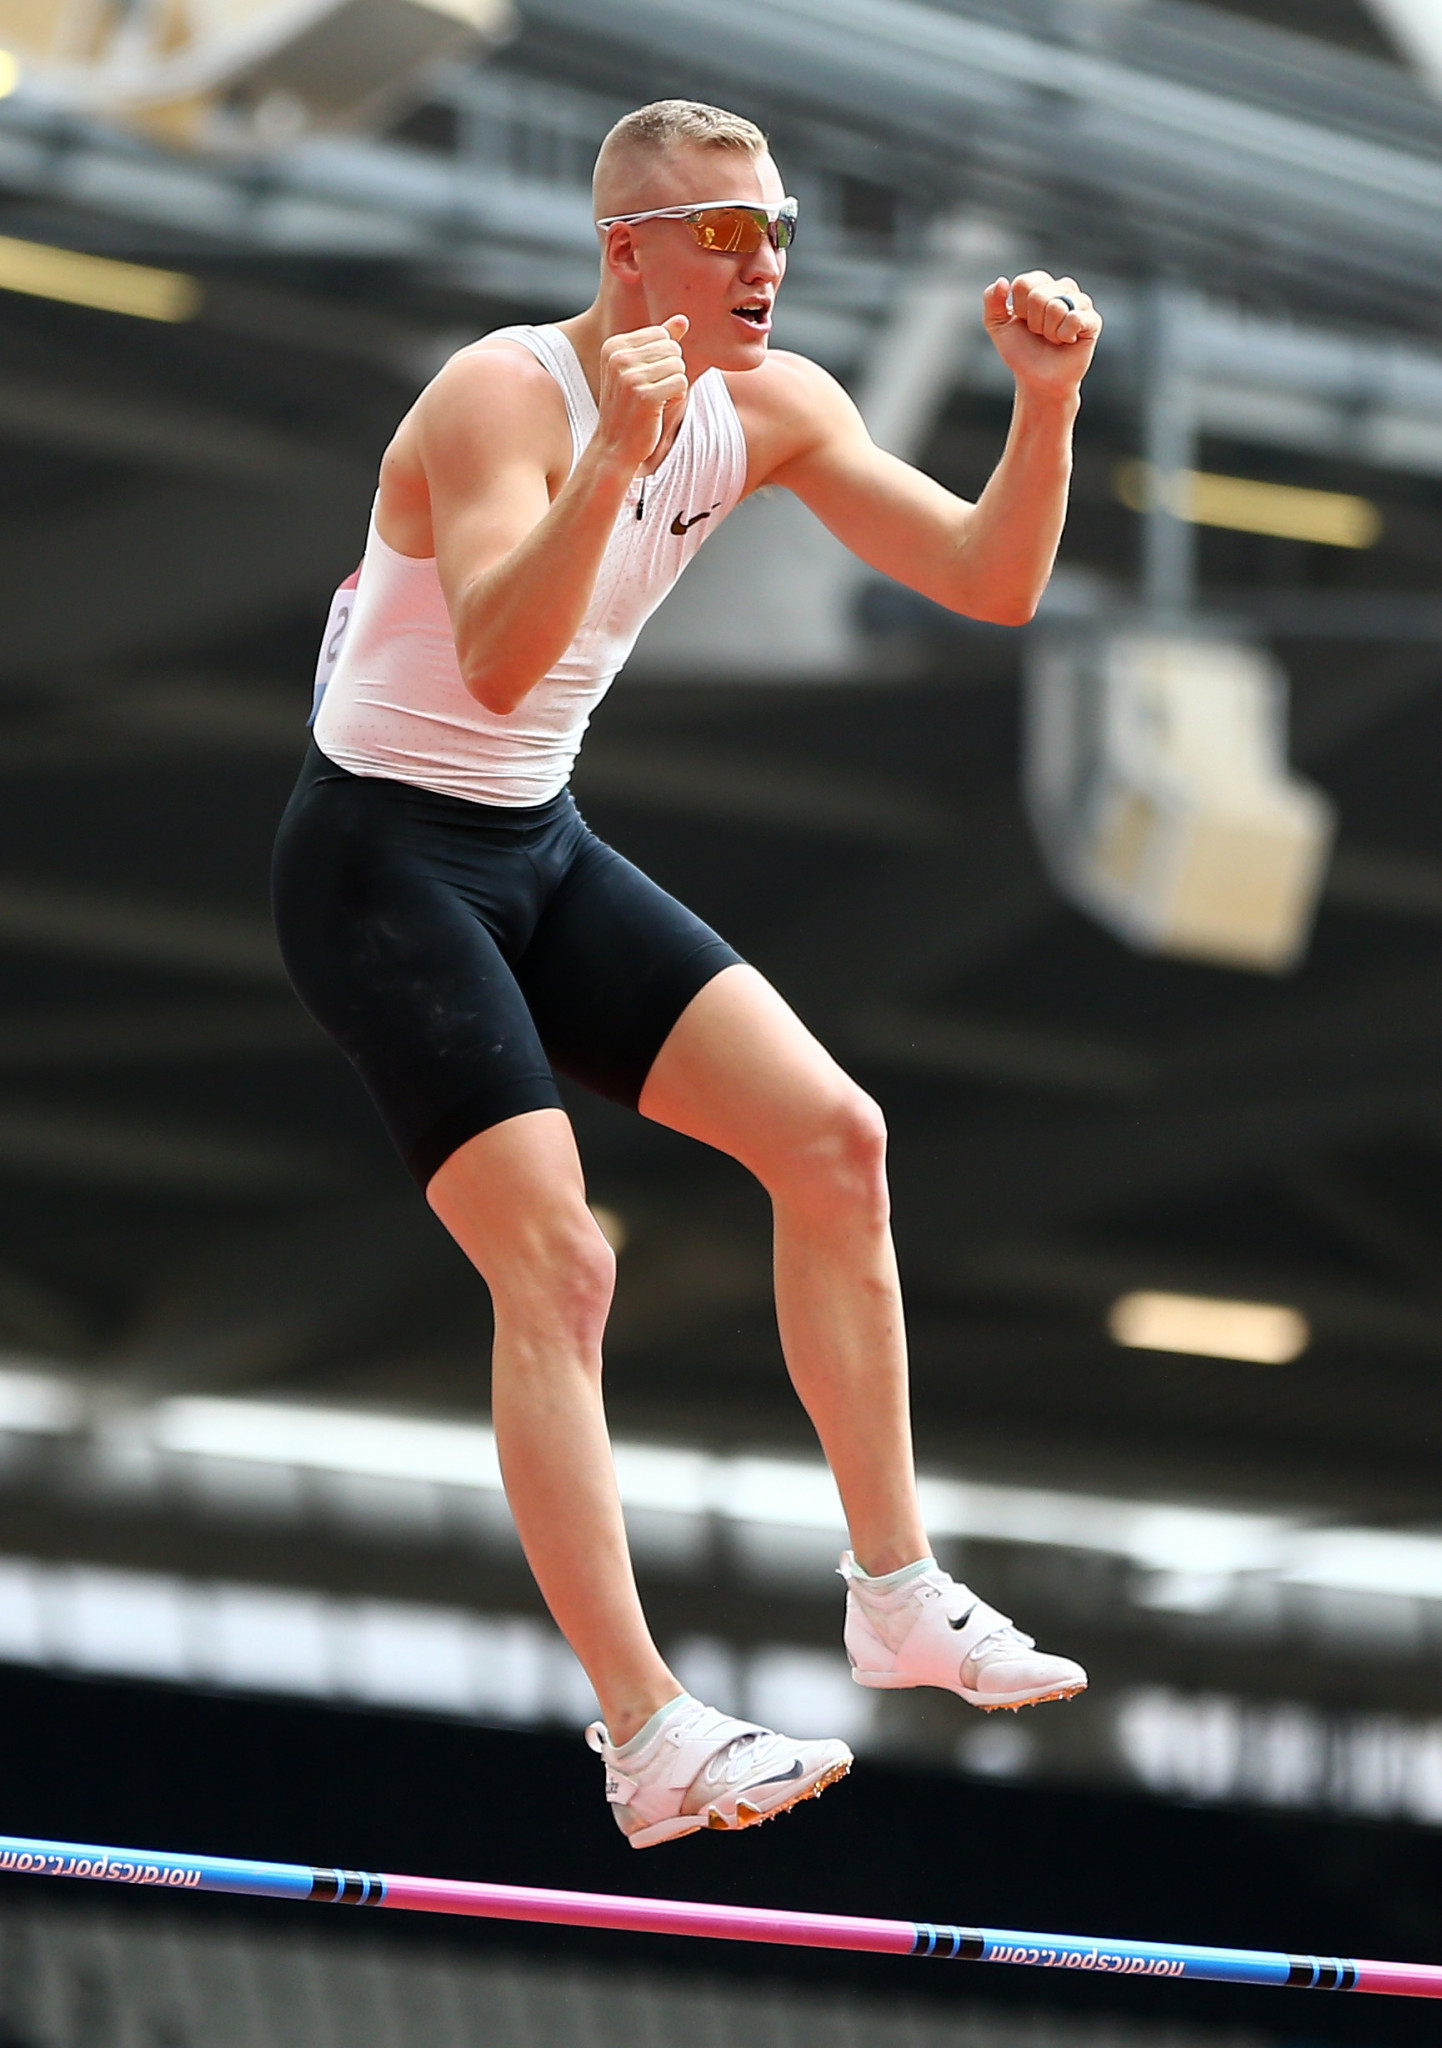   Sam Kendricks of the United States, the pole vault world champion, was in festive mode after being the only one to cross 5.92m at the IAAF Diamond League in London © Getty Images [19659020] Sam Kendricks of the United States, pole vault world champion, was in contention after being the only one to break the 5.92m mark in London. © Getty Images [19659021] There was a popular winner in the women's long jump, as Briton Shara Proctor produced an impressive series in which five of his six efforts were beyond 6.80m, his best one 6.91m was pretty to defeat compatriot Lorraine Ugen, whose second place in Ugen means that she remains at the top of the IAAF Diamond League standings. </p>
<p>  American Paul Chelimo won a first victory in an IAAF Diamond League race, moving away from Ethiopian Yomif Kejelcha to win men's Kejelcha's [ismovedforwardtothebellbuttheOlympicsilvermedalistfollowedhimbeforeconsolidatinghisleadandcrossingthefirstin13min1401sec</p>
<p>  In opening Diamond discipline on the track, America's Shamier Janieve Russell, of Little, and Jamaican, resumed his duel against Lausanne at 400m hurdles </p>
<p>  Dalilah Muhammad, US Olympic champion, crossed the first 200m, but Little and Russell placed first. A slight advantage but, as in Switzerland, Little showed tremendous strength through the last barrier and dominated with a dive, winning by 0.01 seconds in 53.95. </p>
<p>  One year after his record-breaking one-mile performance, Briton Tom Bosworth was a world best in the men's 3,000-meter race of 10: 43.9. </p>
</p></div>
<p><script>  (function (d, s, id) {
var js, fjs = d.getElementsByTagName (s) [0];
if (d.getElementById (id)) returns;
js = d.createElement (s); js.id = id;
js.src = "http://connect.facebook.net/en_GB/all.js#xfbml=1";
fjs.parentNode.insertBefore (js, fjs);
} (document, 'script', 'facebook-jssdk')); </script></pre>
</pre>
[ad_2]
<br /><a href=